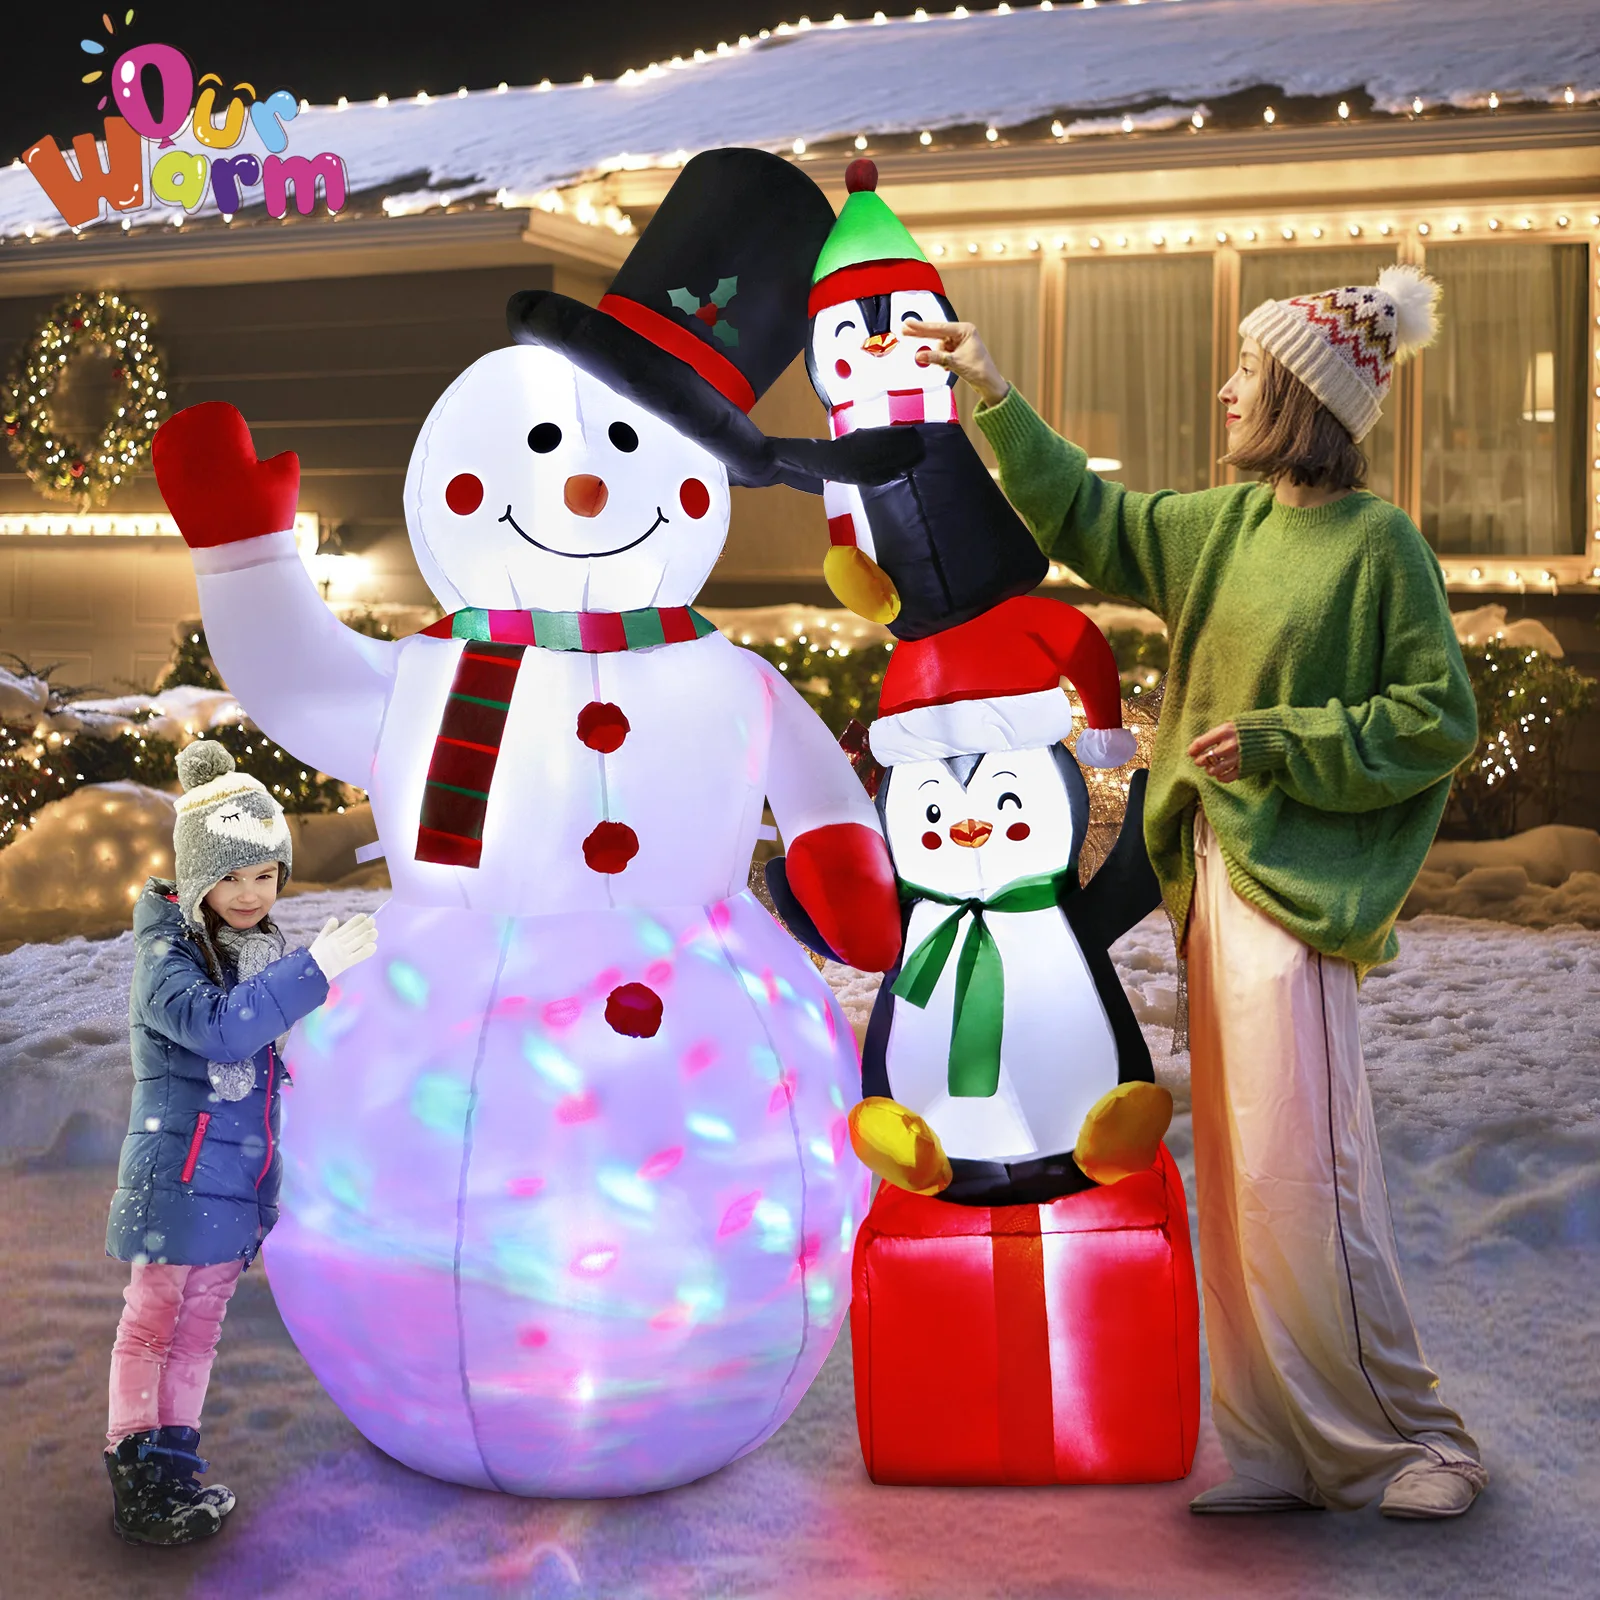 

OurWarm 6FT Christmas Inflatable Snowman and Penguin Outdoor Decorations with Build-in LEDs For Court Lawn Garden Party Ornament